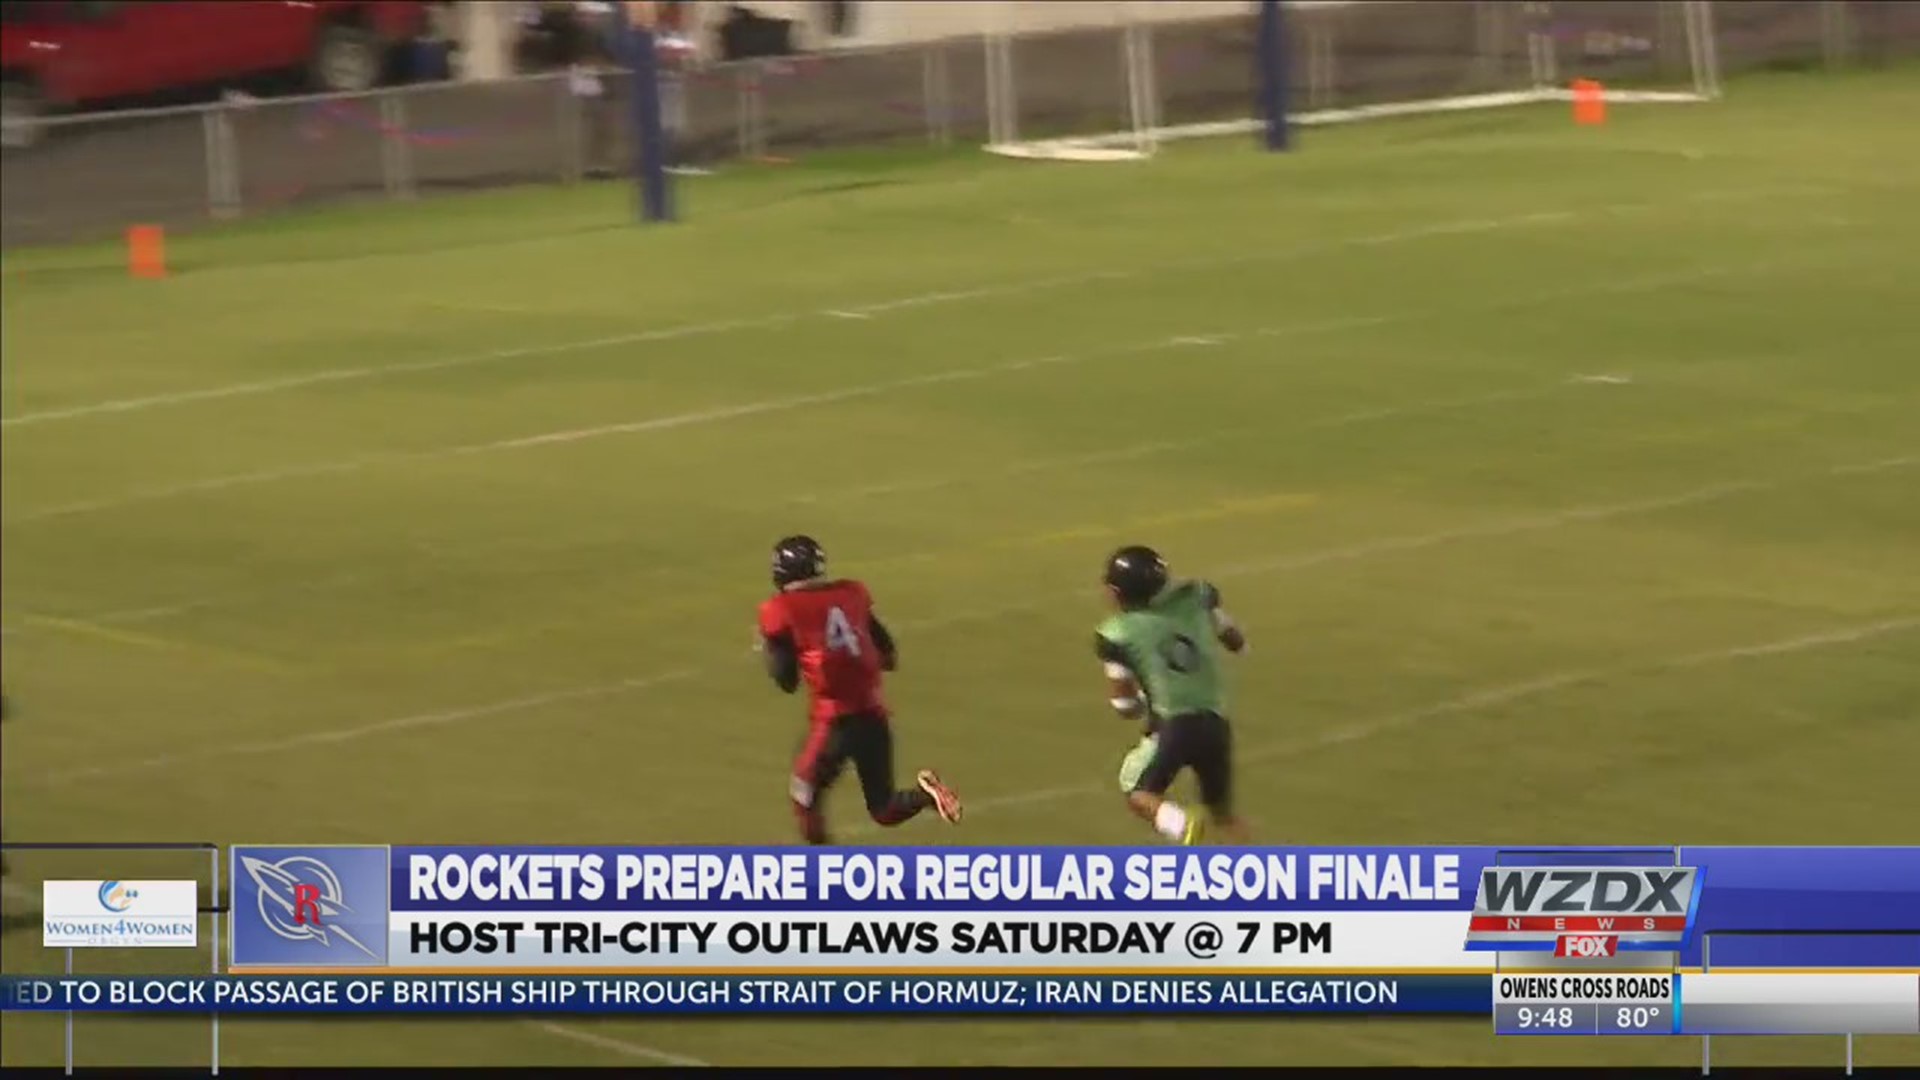 The Huntsville Rockets will play their final home game of the regular season this Saturday against the Tri-City Outlaws